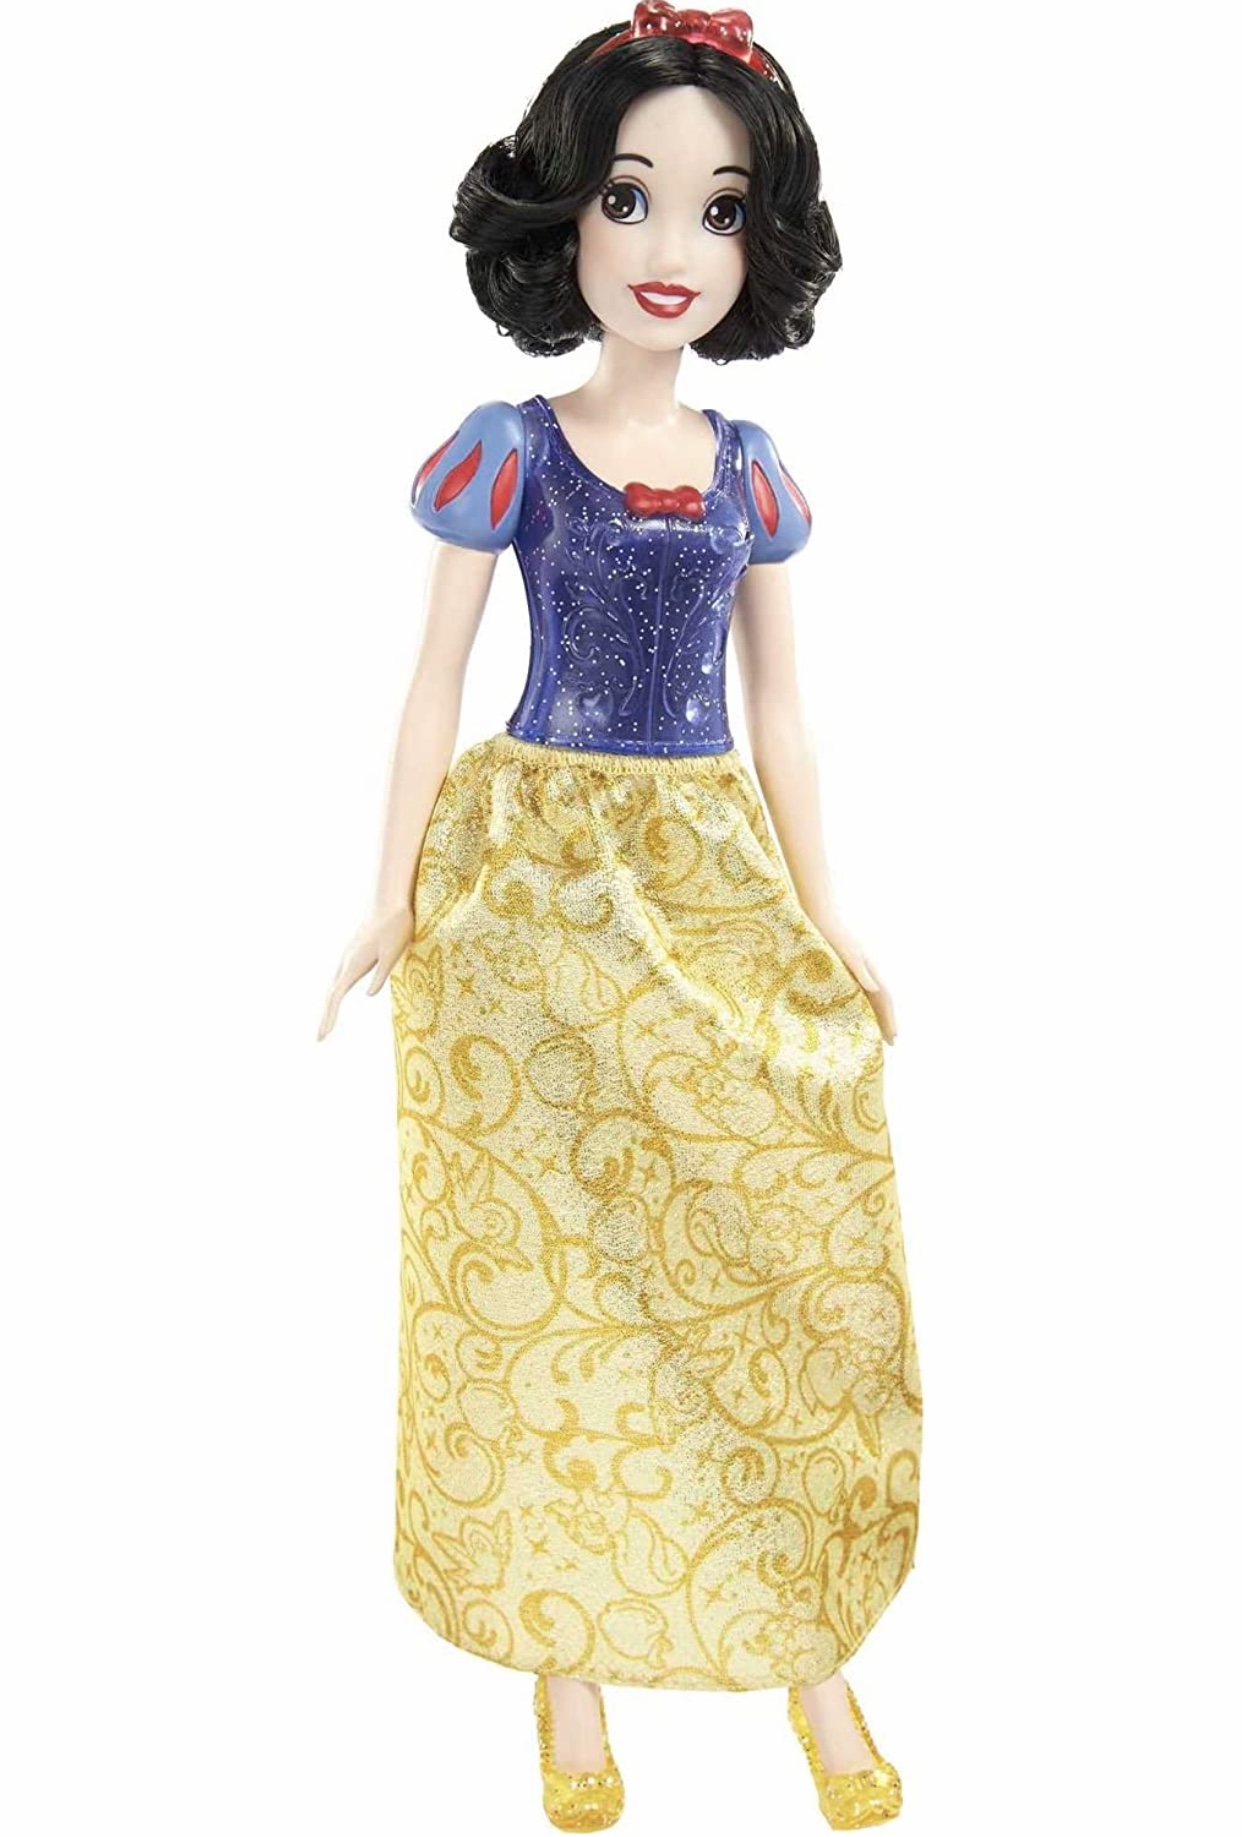 Disney Princess Dolls, New for 2023, Snow White Posable Fashion Doll with Sparkling Clothing and Accessories, Disney Movie Toys - image 5 of 6